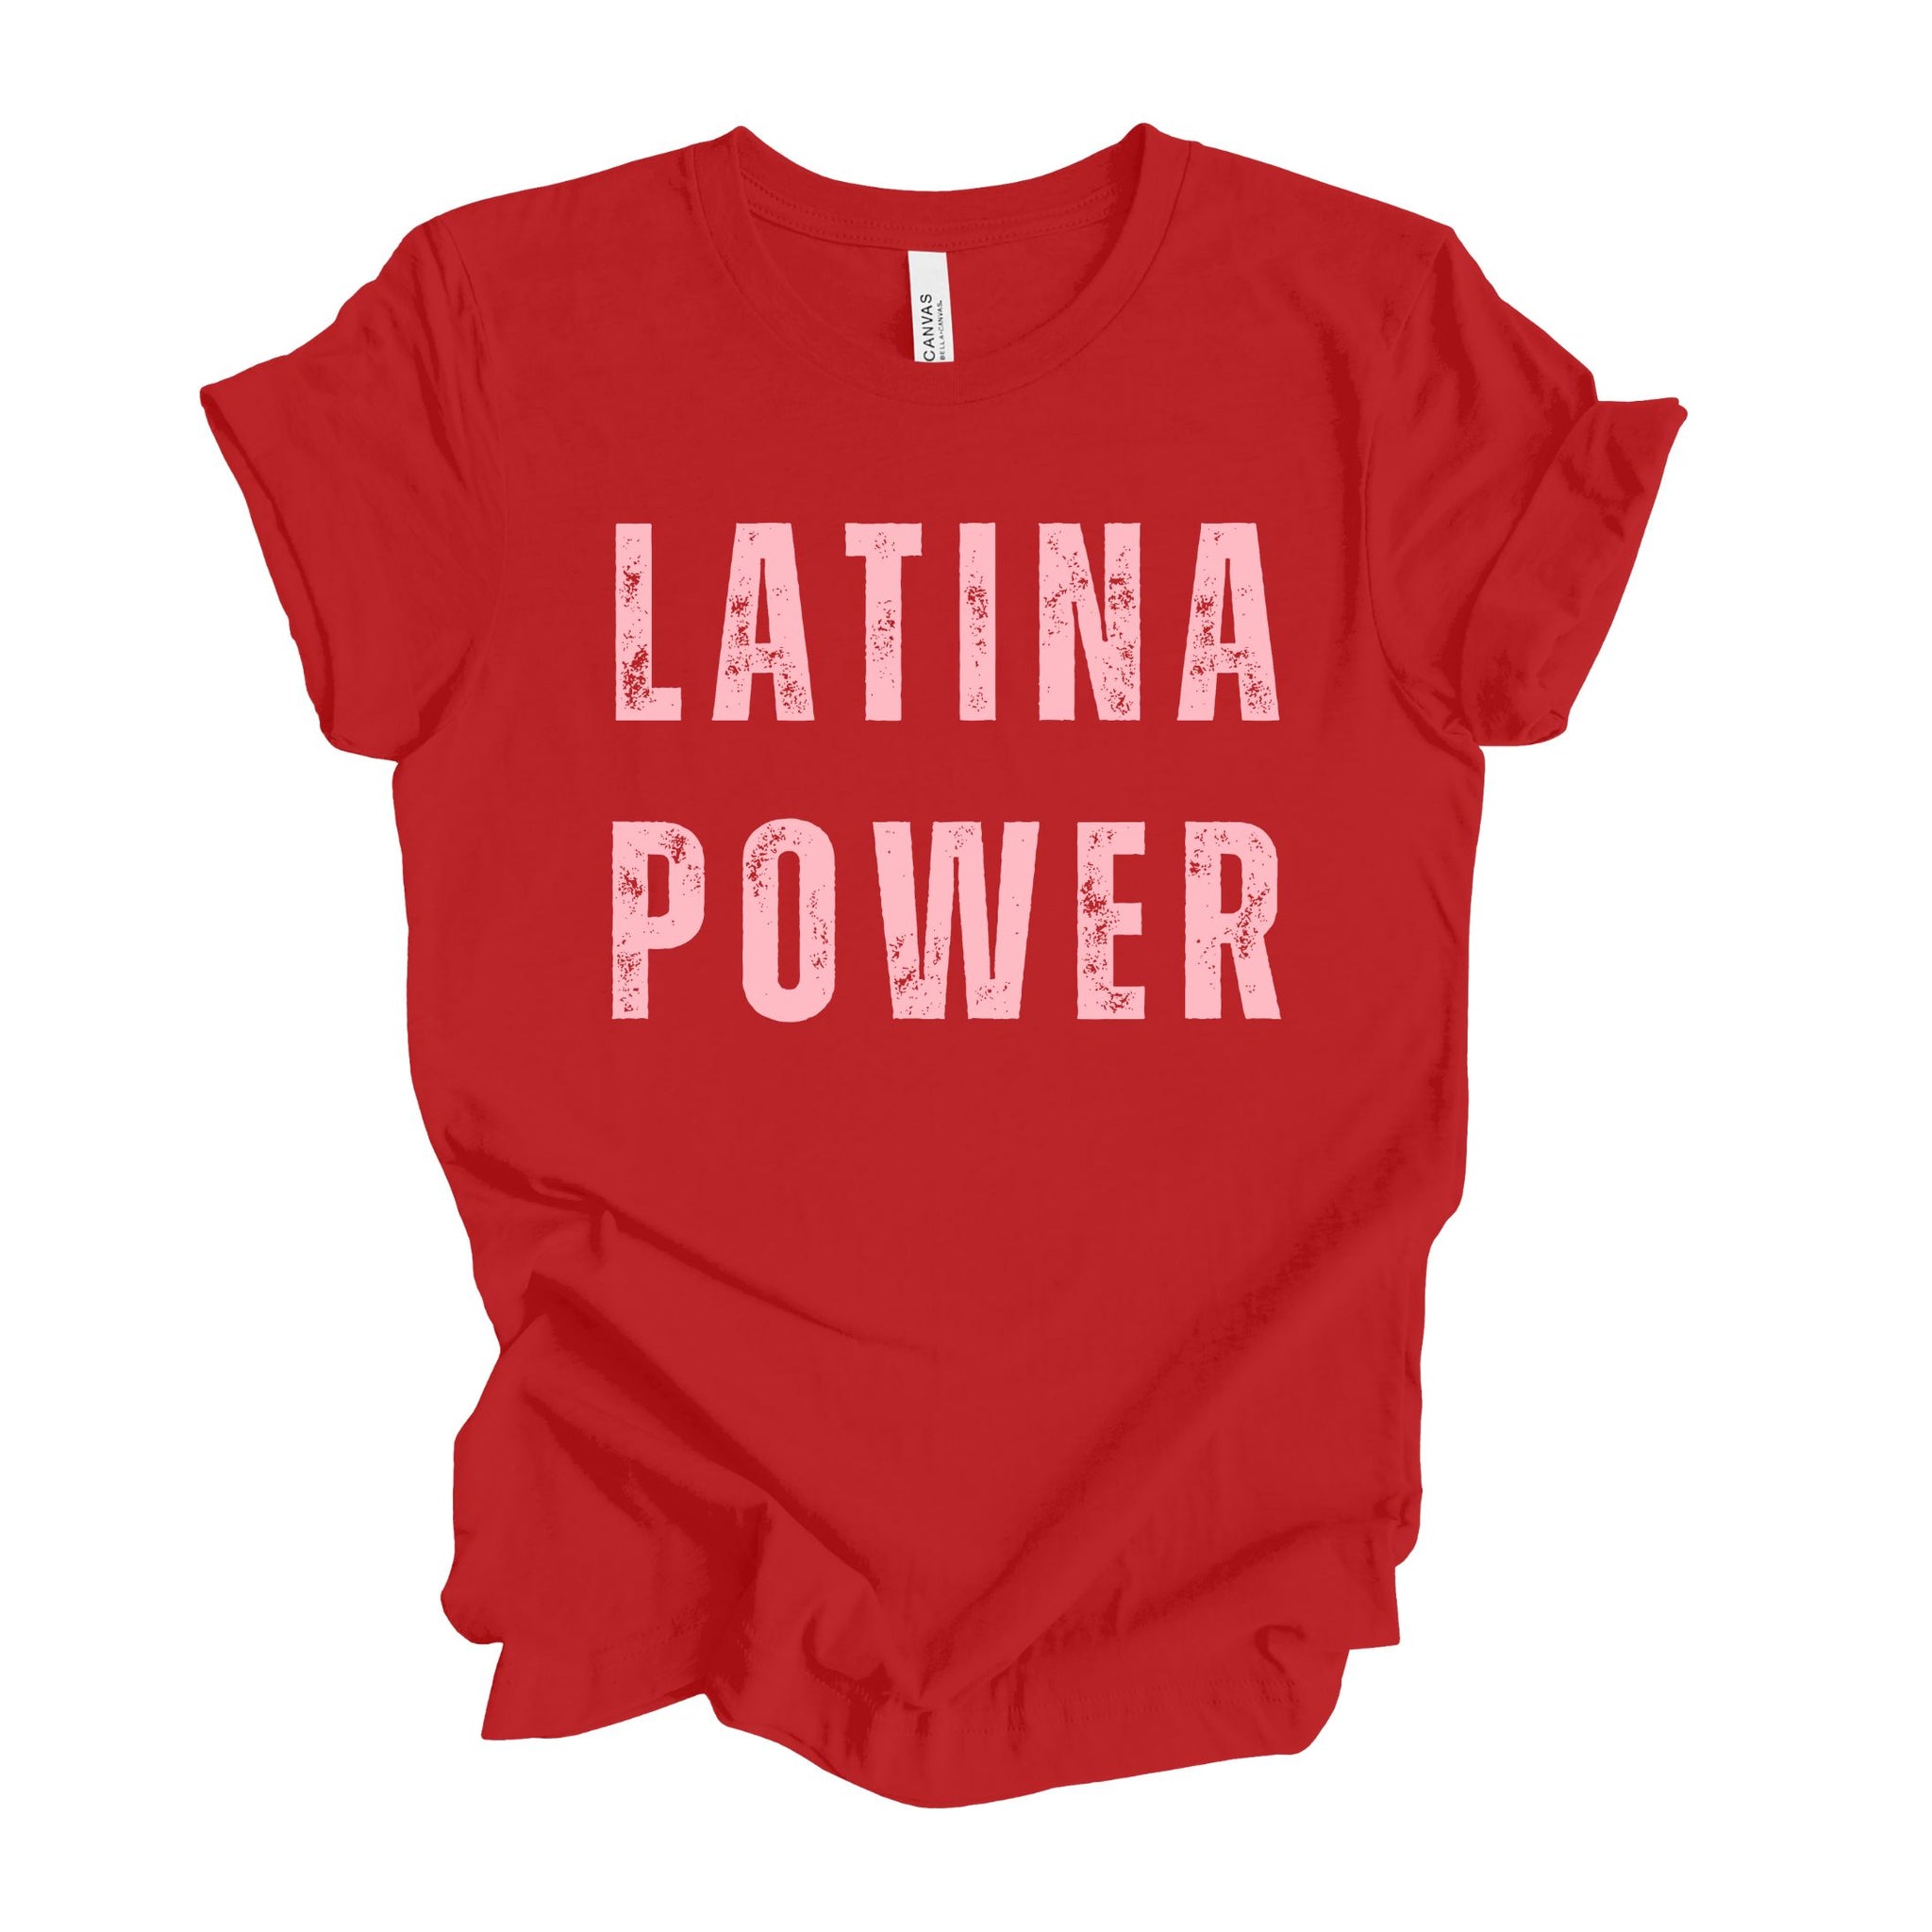 Wear your Latina pride with this vintage-inspired shirt